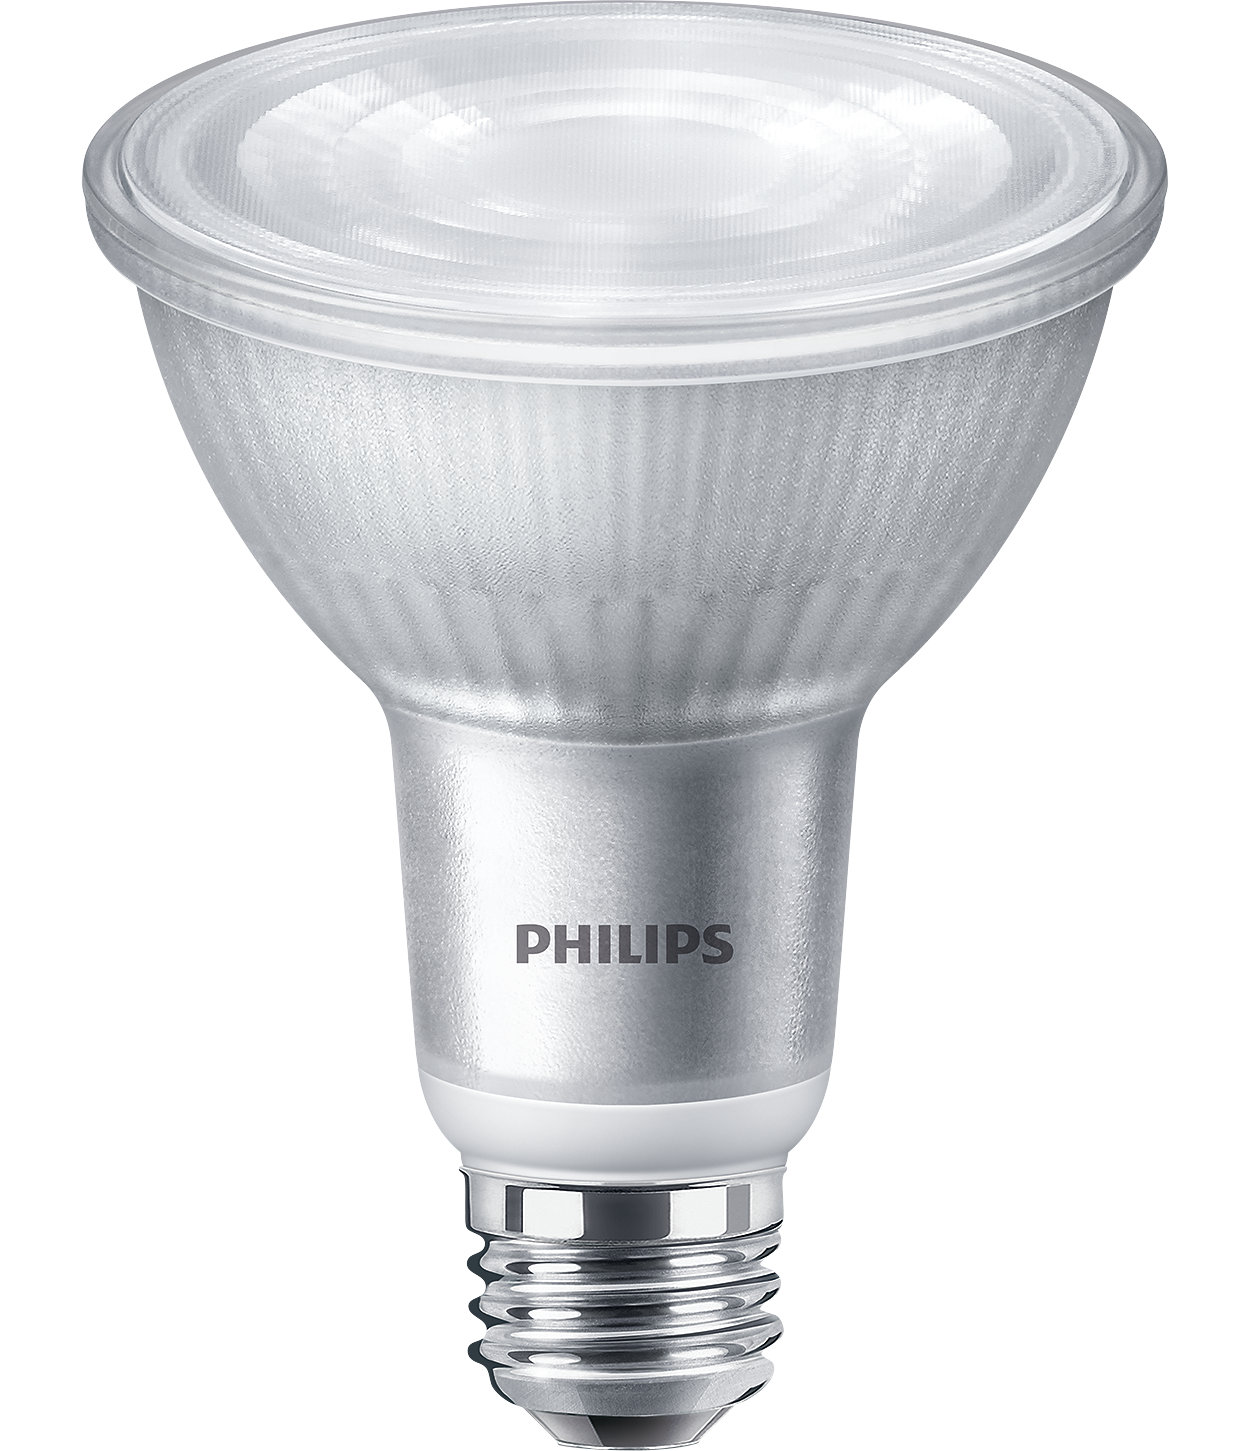 Dimmable LED spot with a focused bright beam